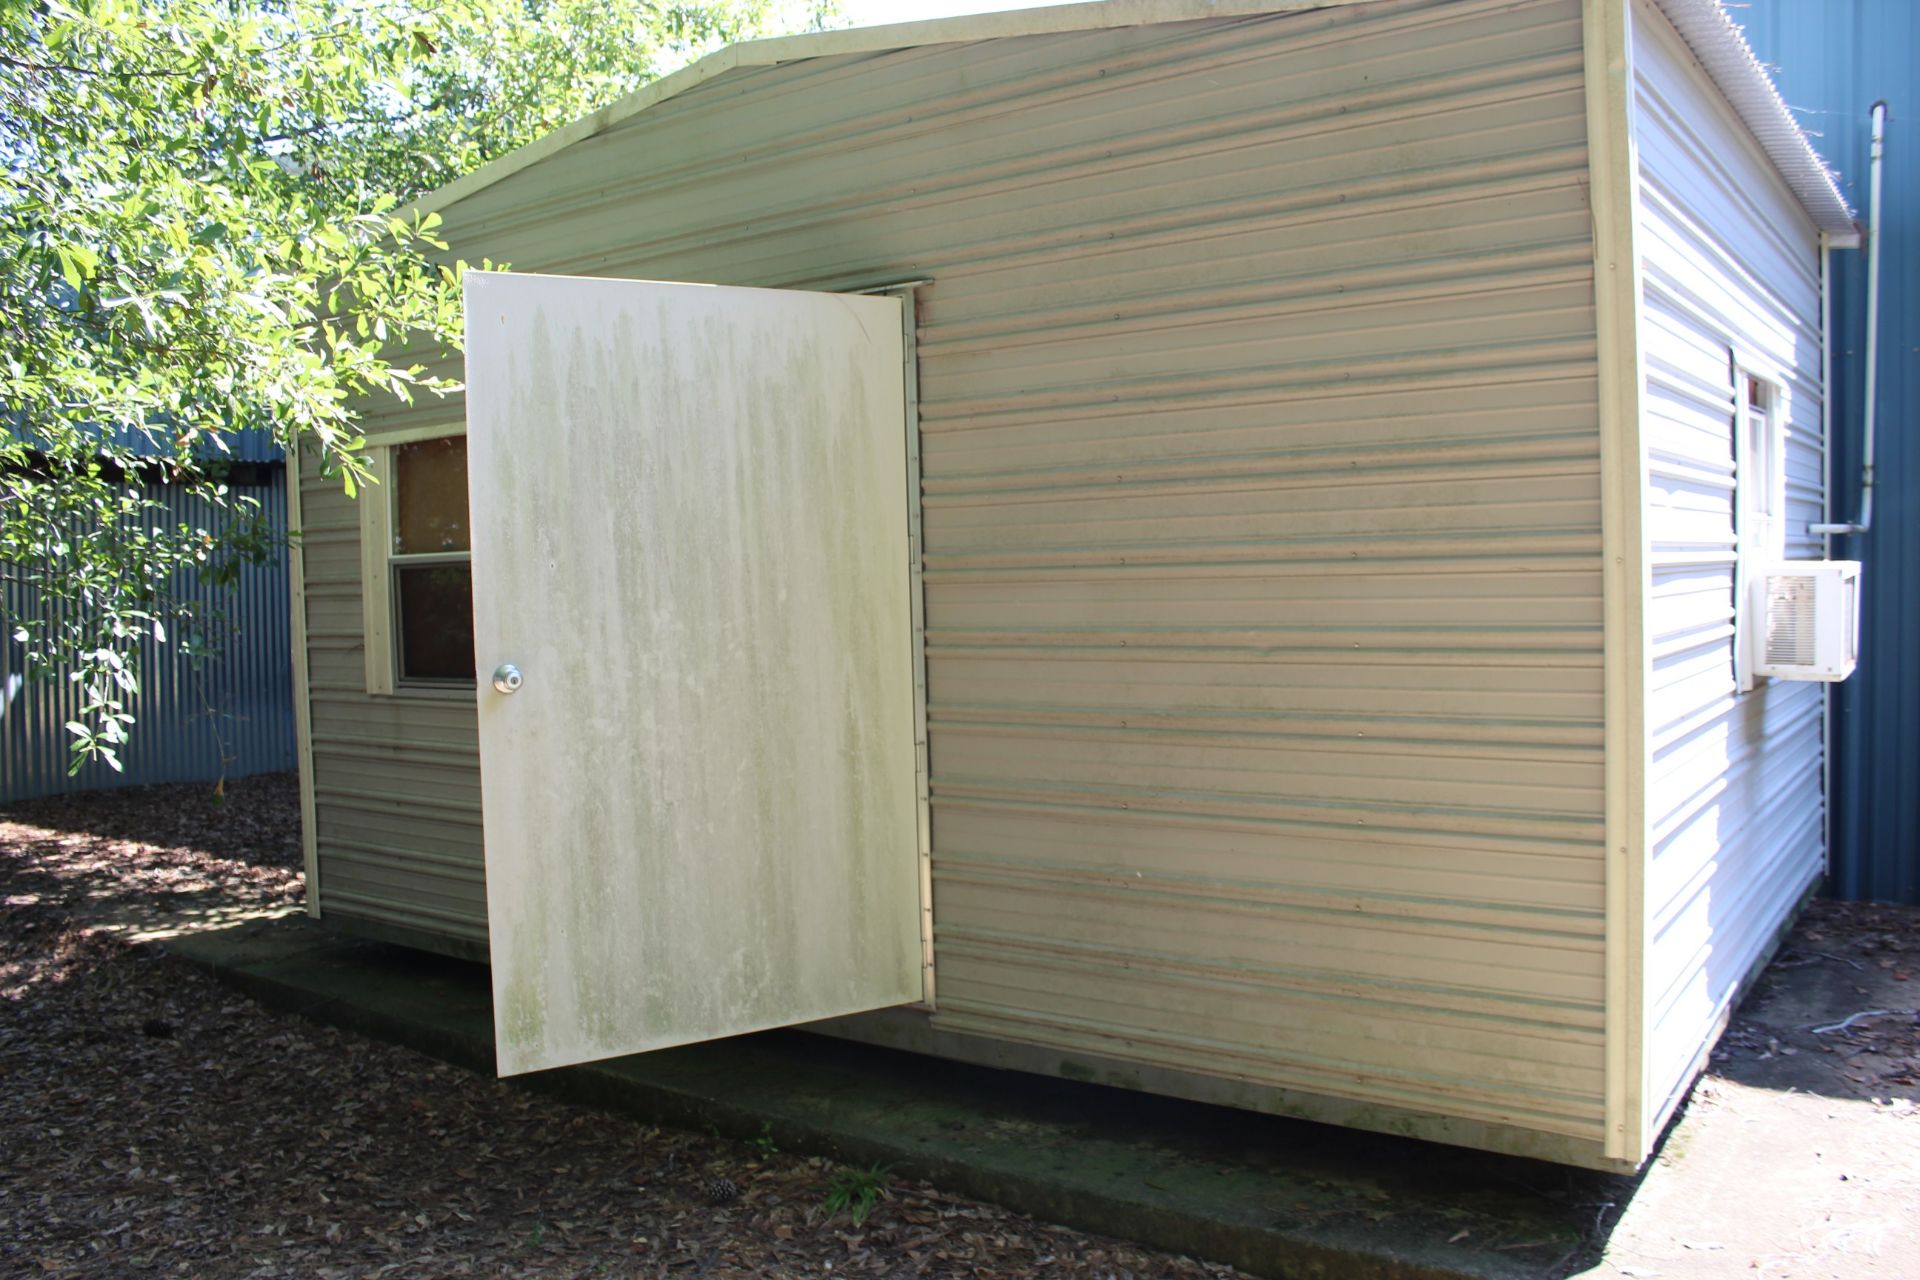 Thrifty Metal Sided 10 x 16 Storage Building w/ Contents, (6) Chairs, Fan, (3) Electric Heaters, (2) - Image 2 of 5